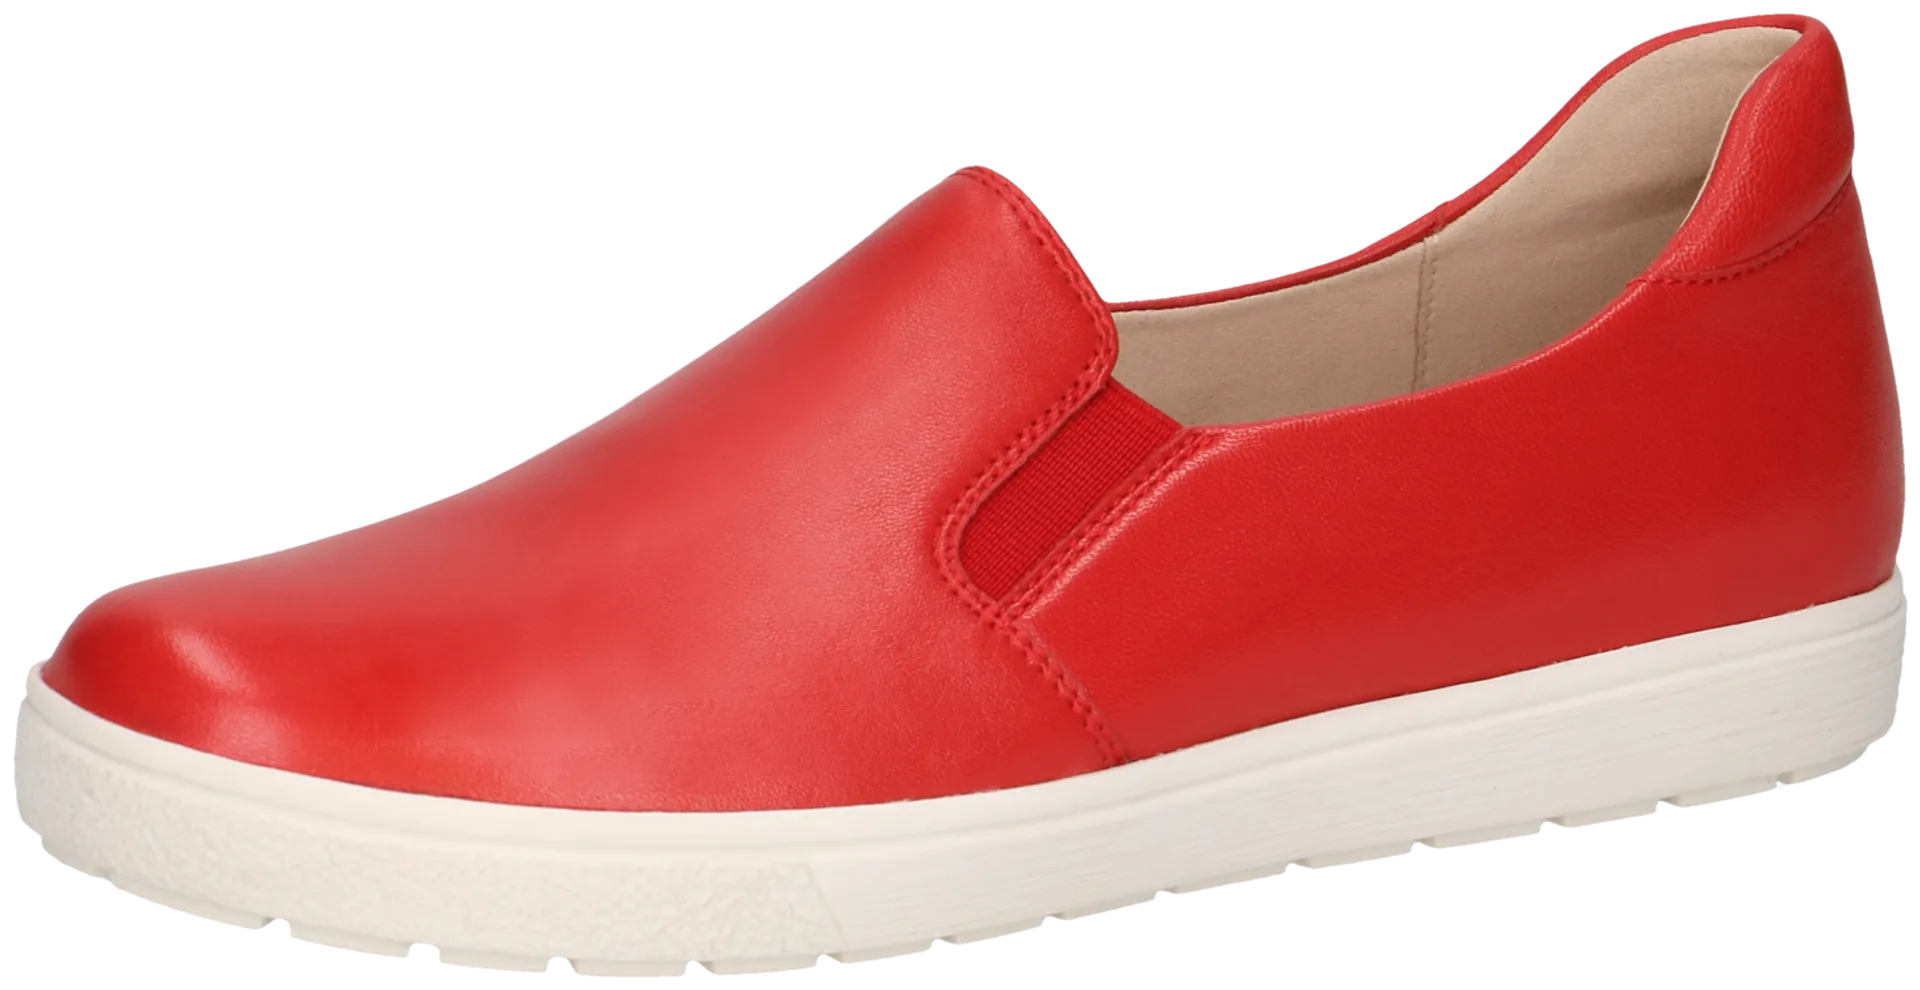 Caprice naisten loafer - Red softnappa - 1